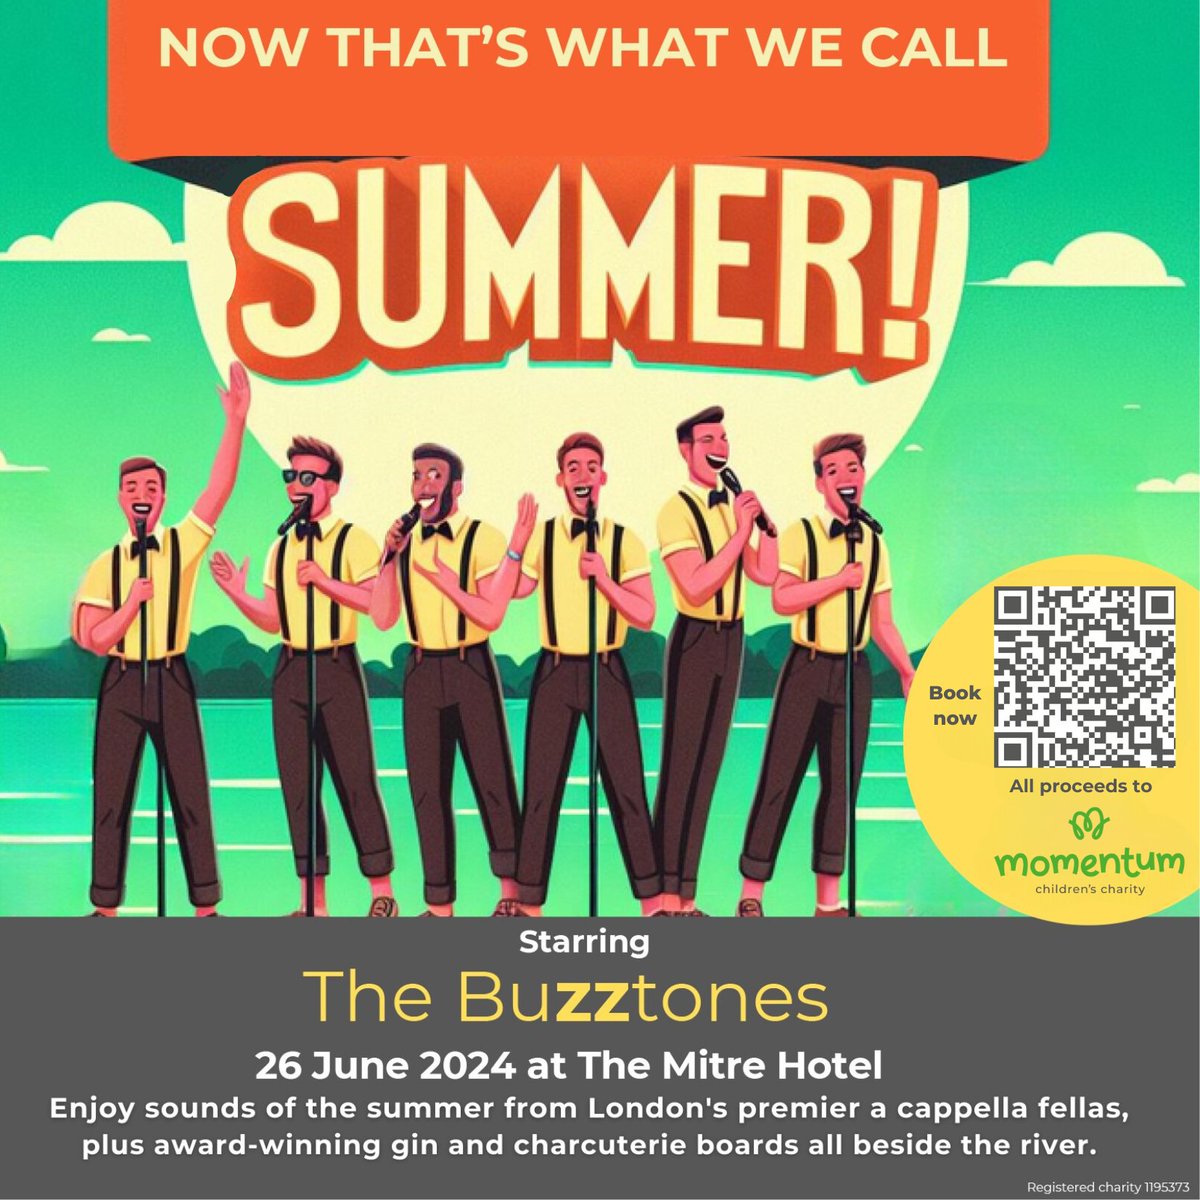 Join us for a delightful summer evening beside the River Thames at The Mitre hotel. @TheBuzztones , London's acclaimed a cappella group, will serenade you with a captivating performance of classic hits. 📷 Book your ticket here tickettailor.com/.../momentumch…